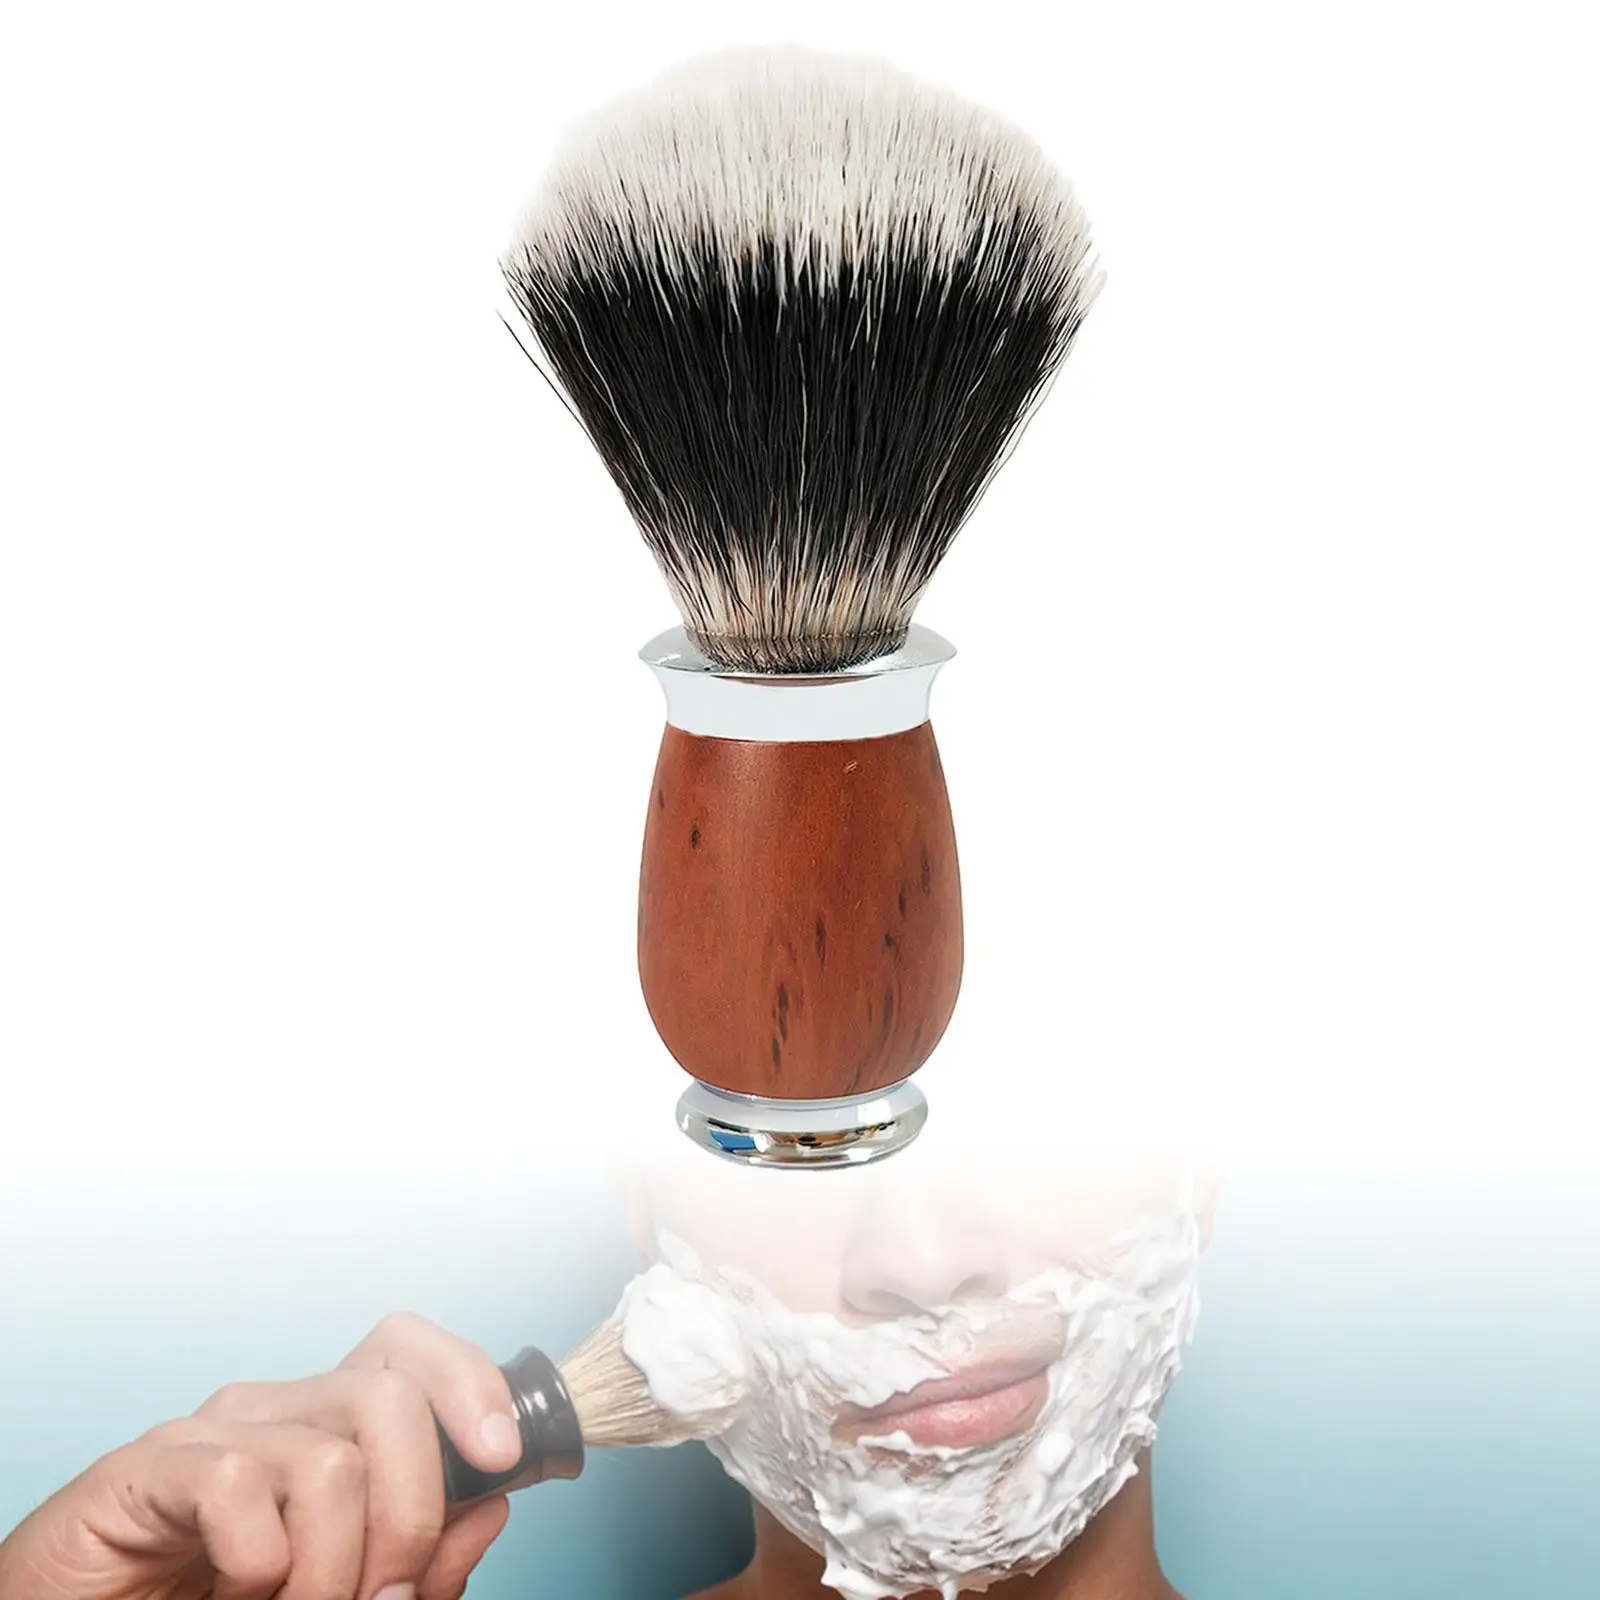 Men Shaving Brush Luxury Rich and Fast Lather Shaving Cream Christmas Gifts Professional for Professional Barber Salon Tools